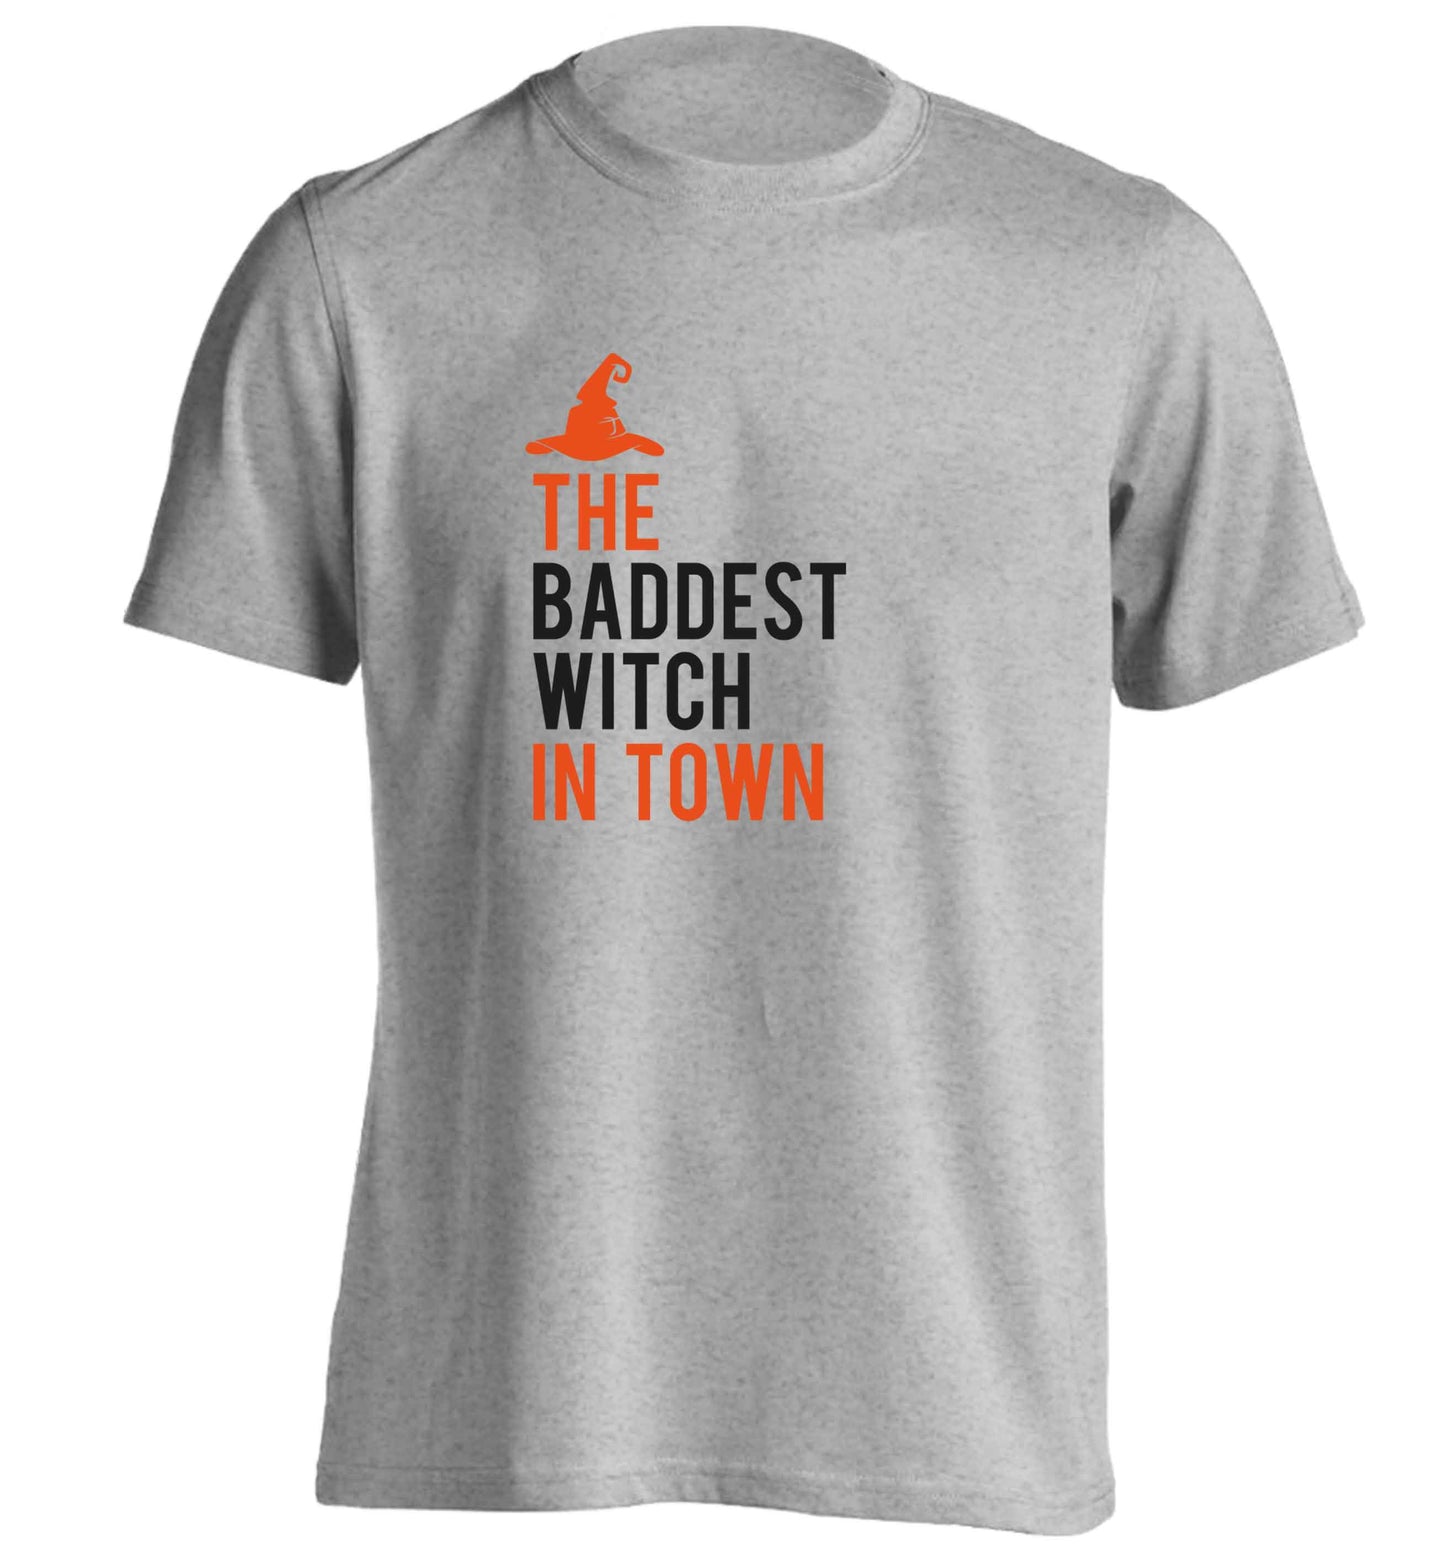 Badest witch in town adults unisex grey Tshirt 2XL